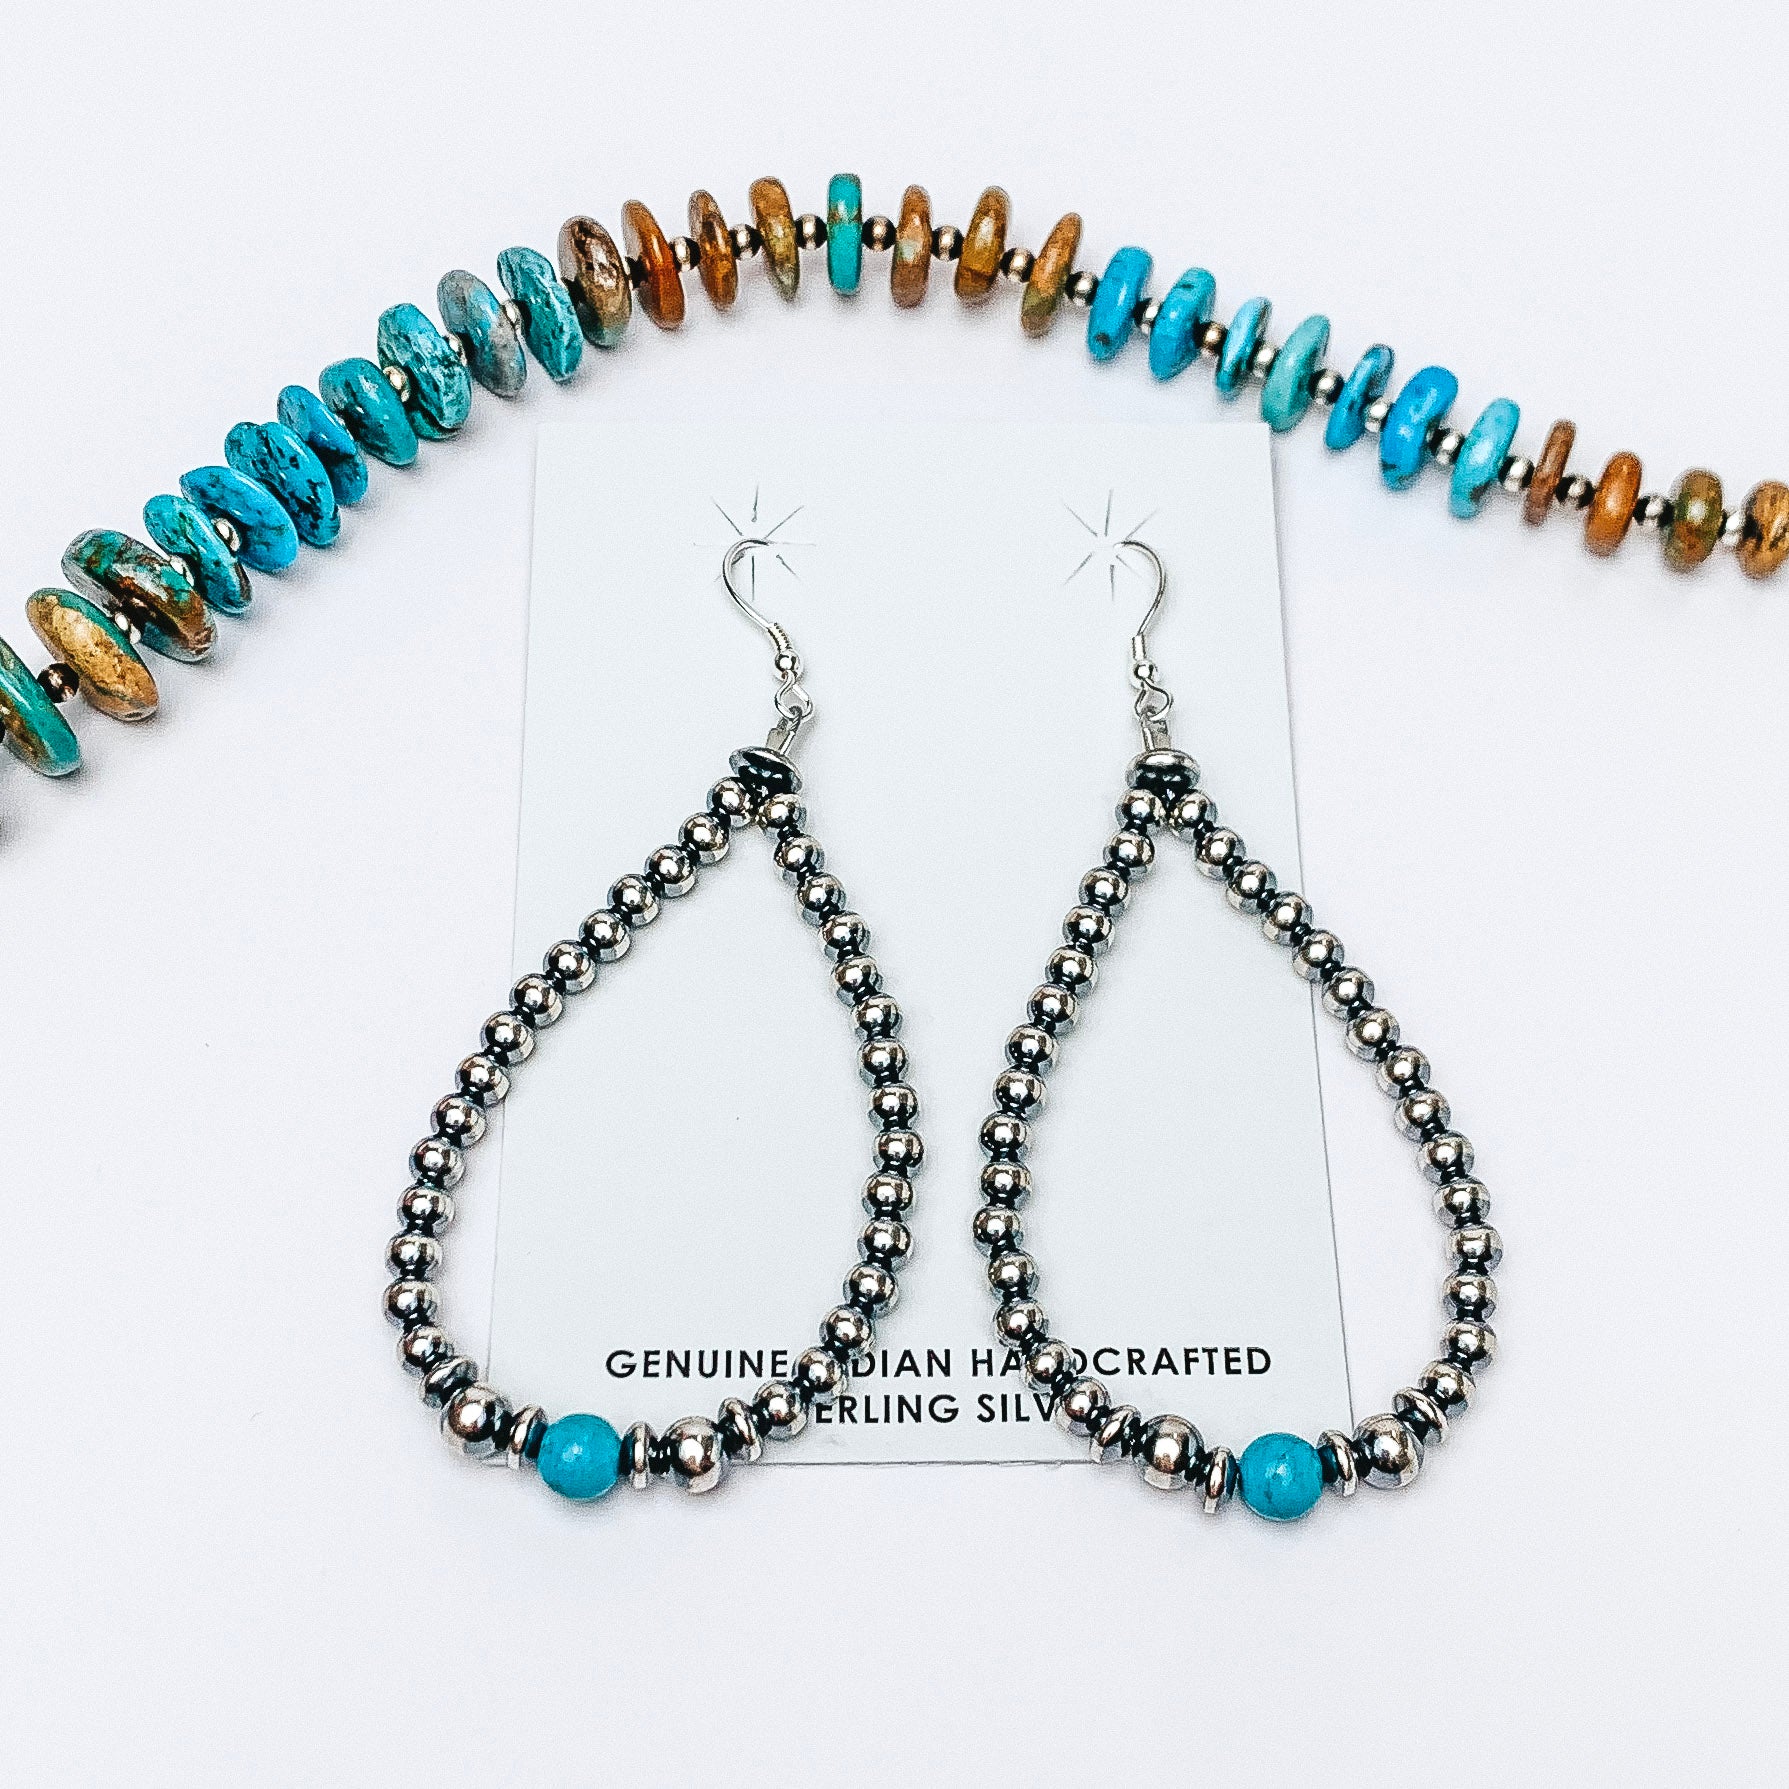 Centered in the picture is teardrop earrings strung in navajo pearls with a single turquoise stone at the bottom. A turquoise necklace sits above the earrings. Background is solid white. 